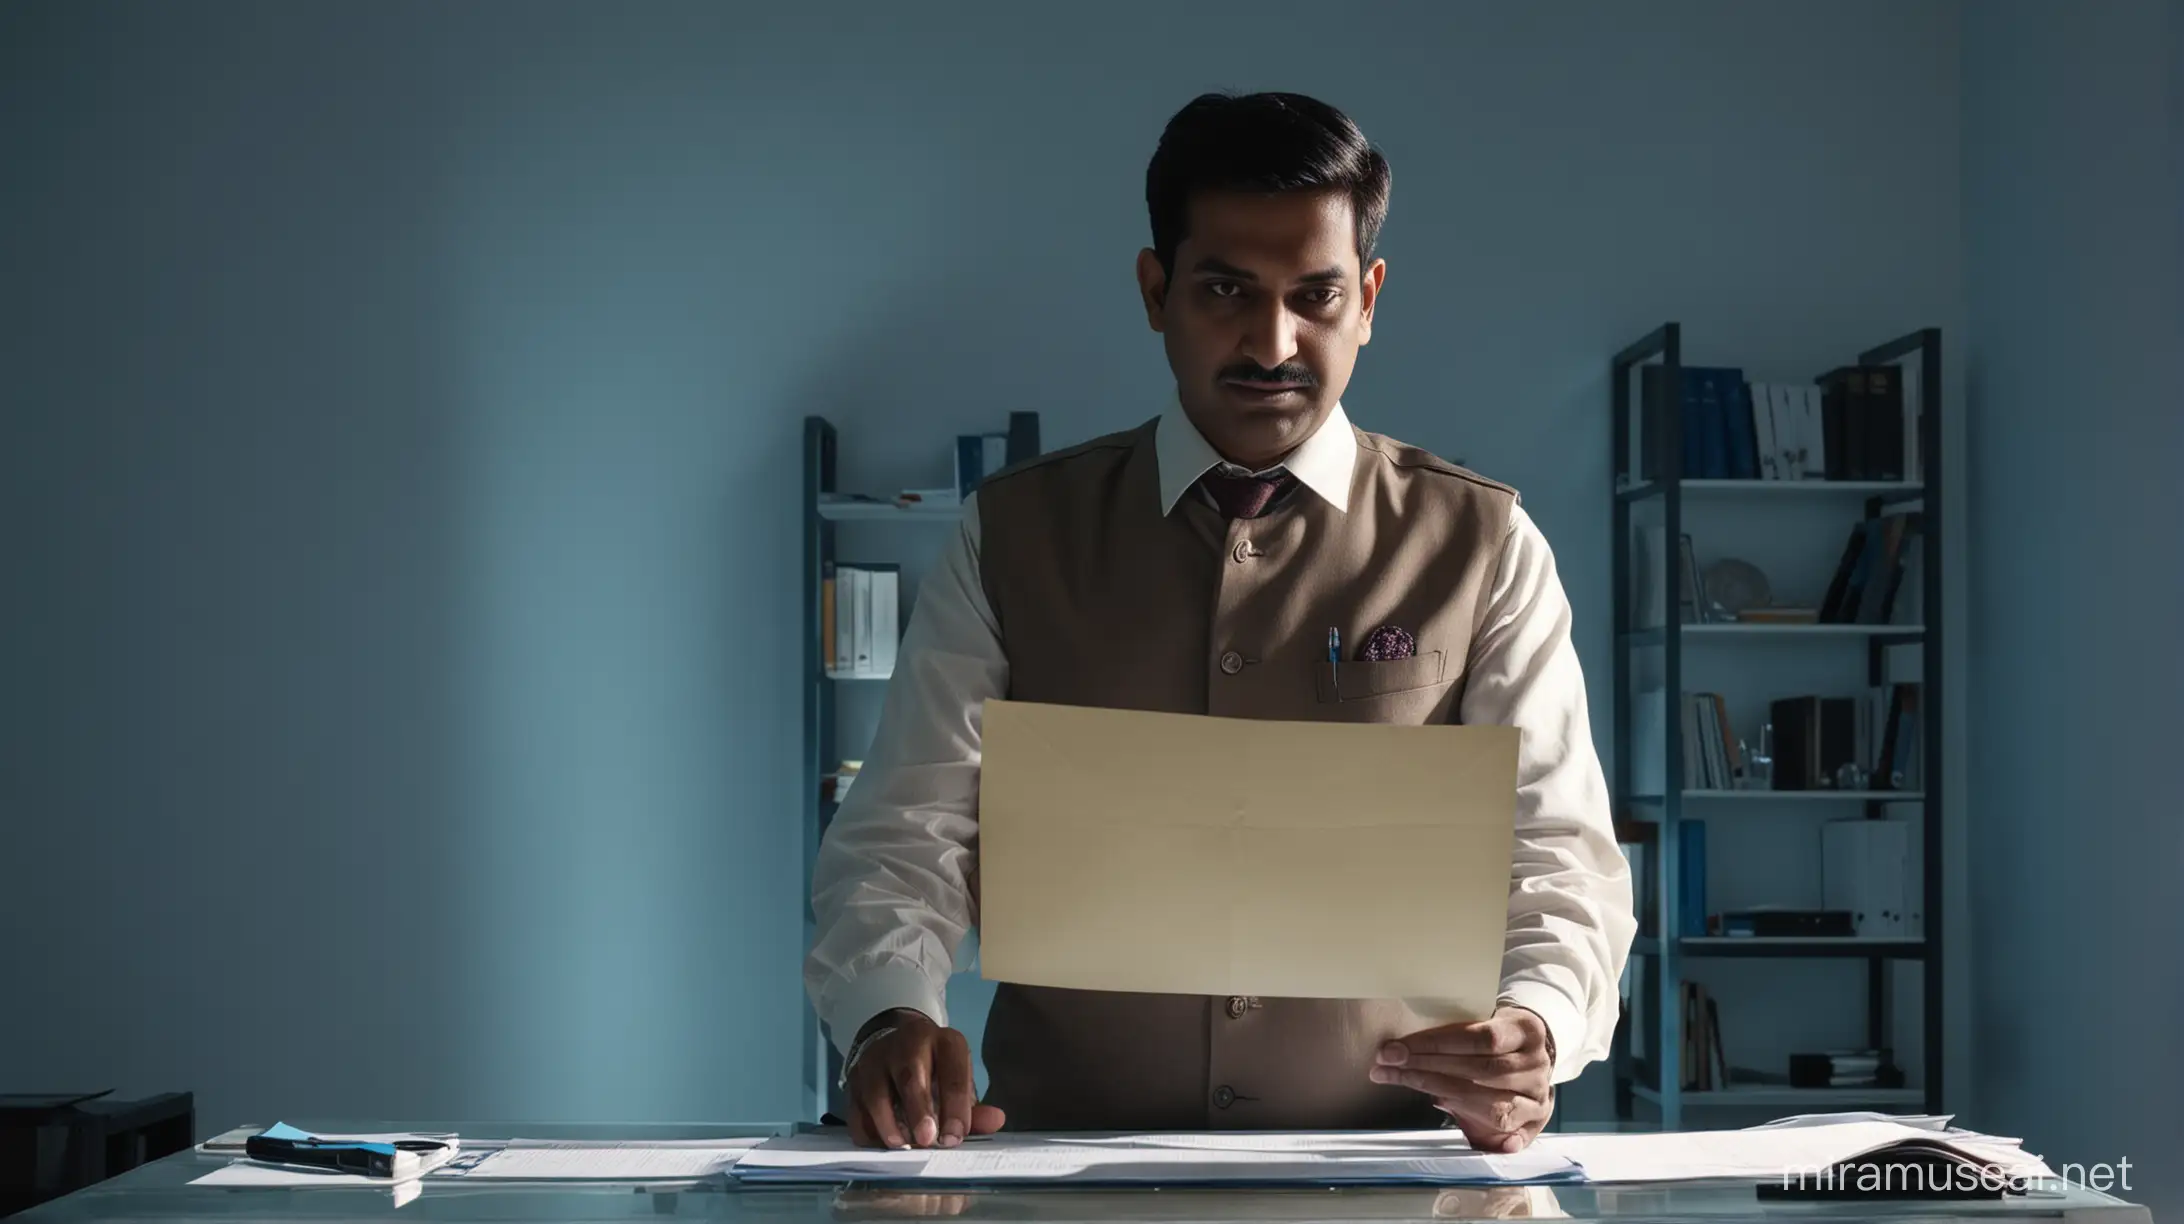 indian official man standing in office, letter in hand, blue backlight, shot from behind